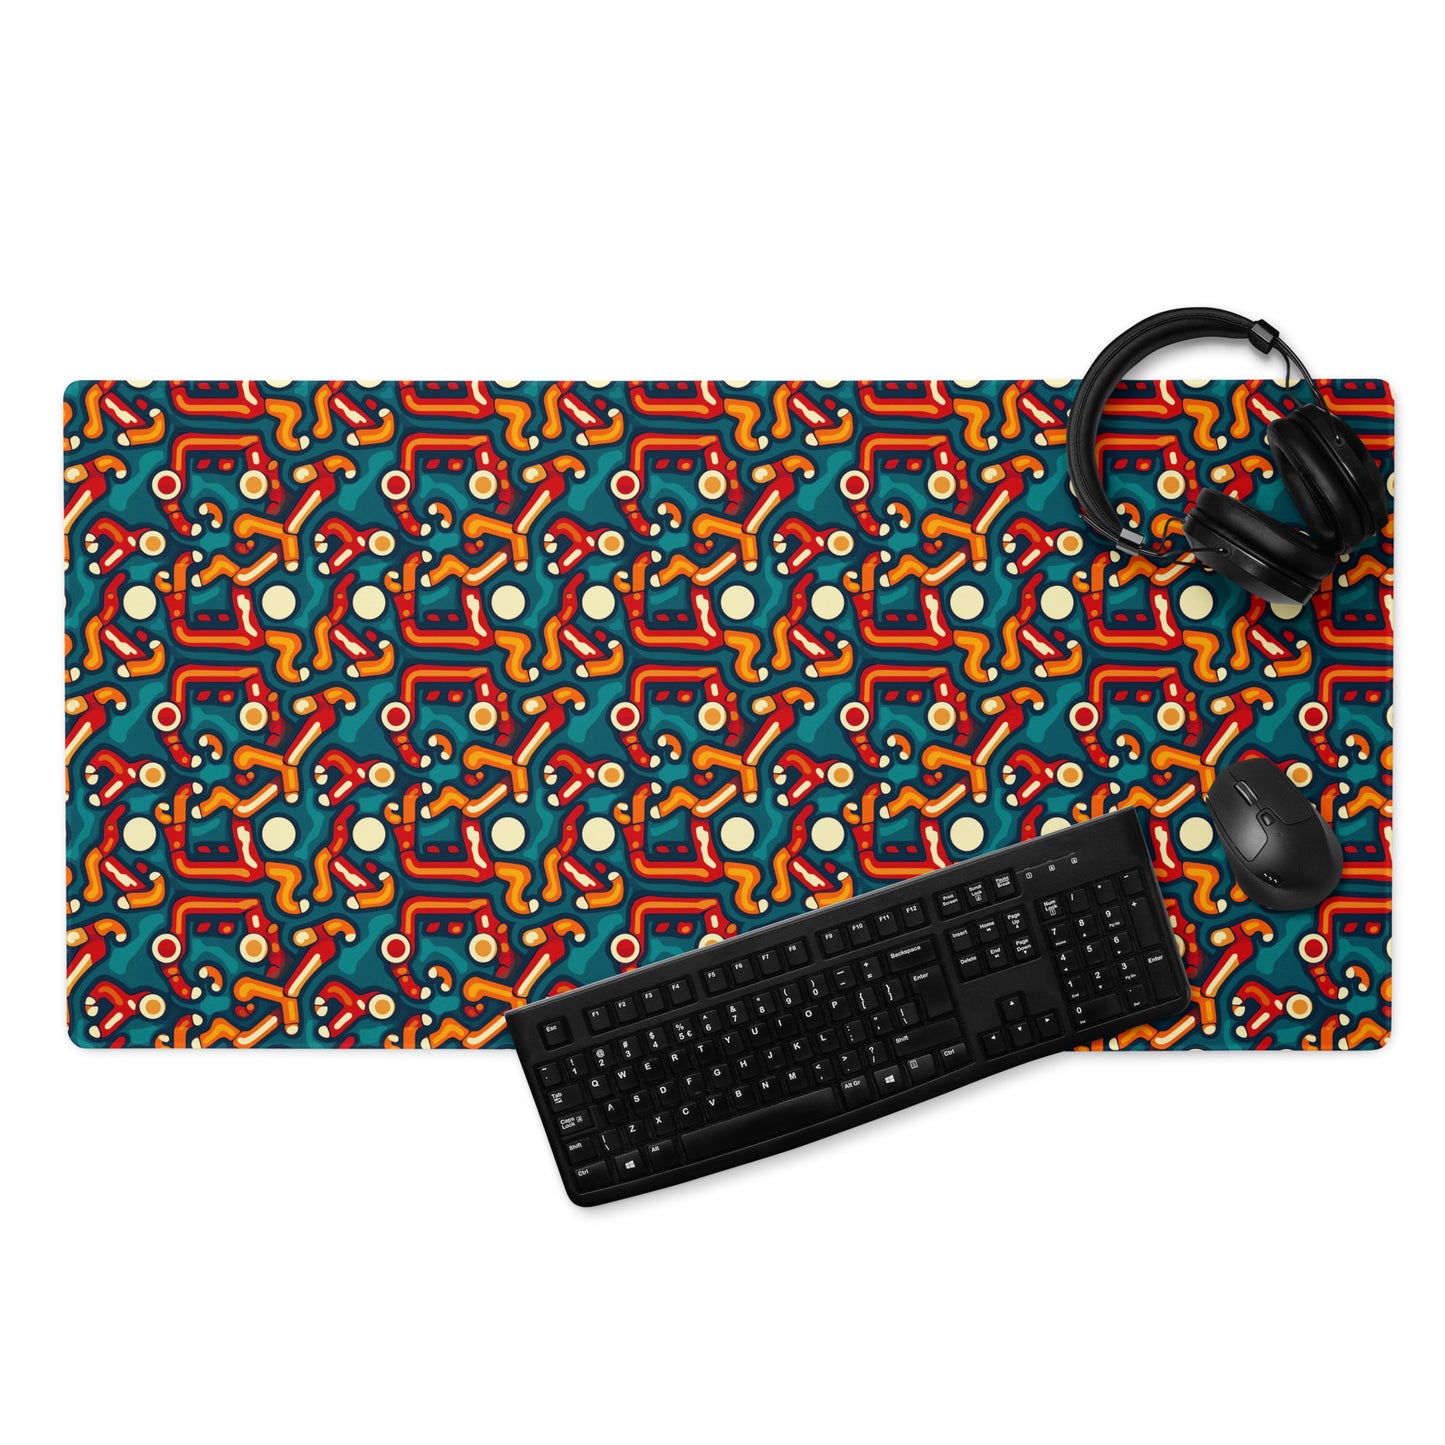 A 36" x 18" desk pad with abstract line art on it displayed with a keyboard, headphones and a mouse. Red, Orange and Teal in color.